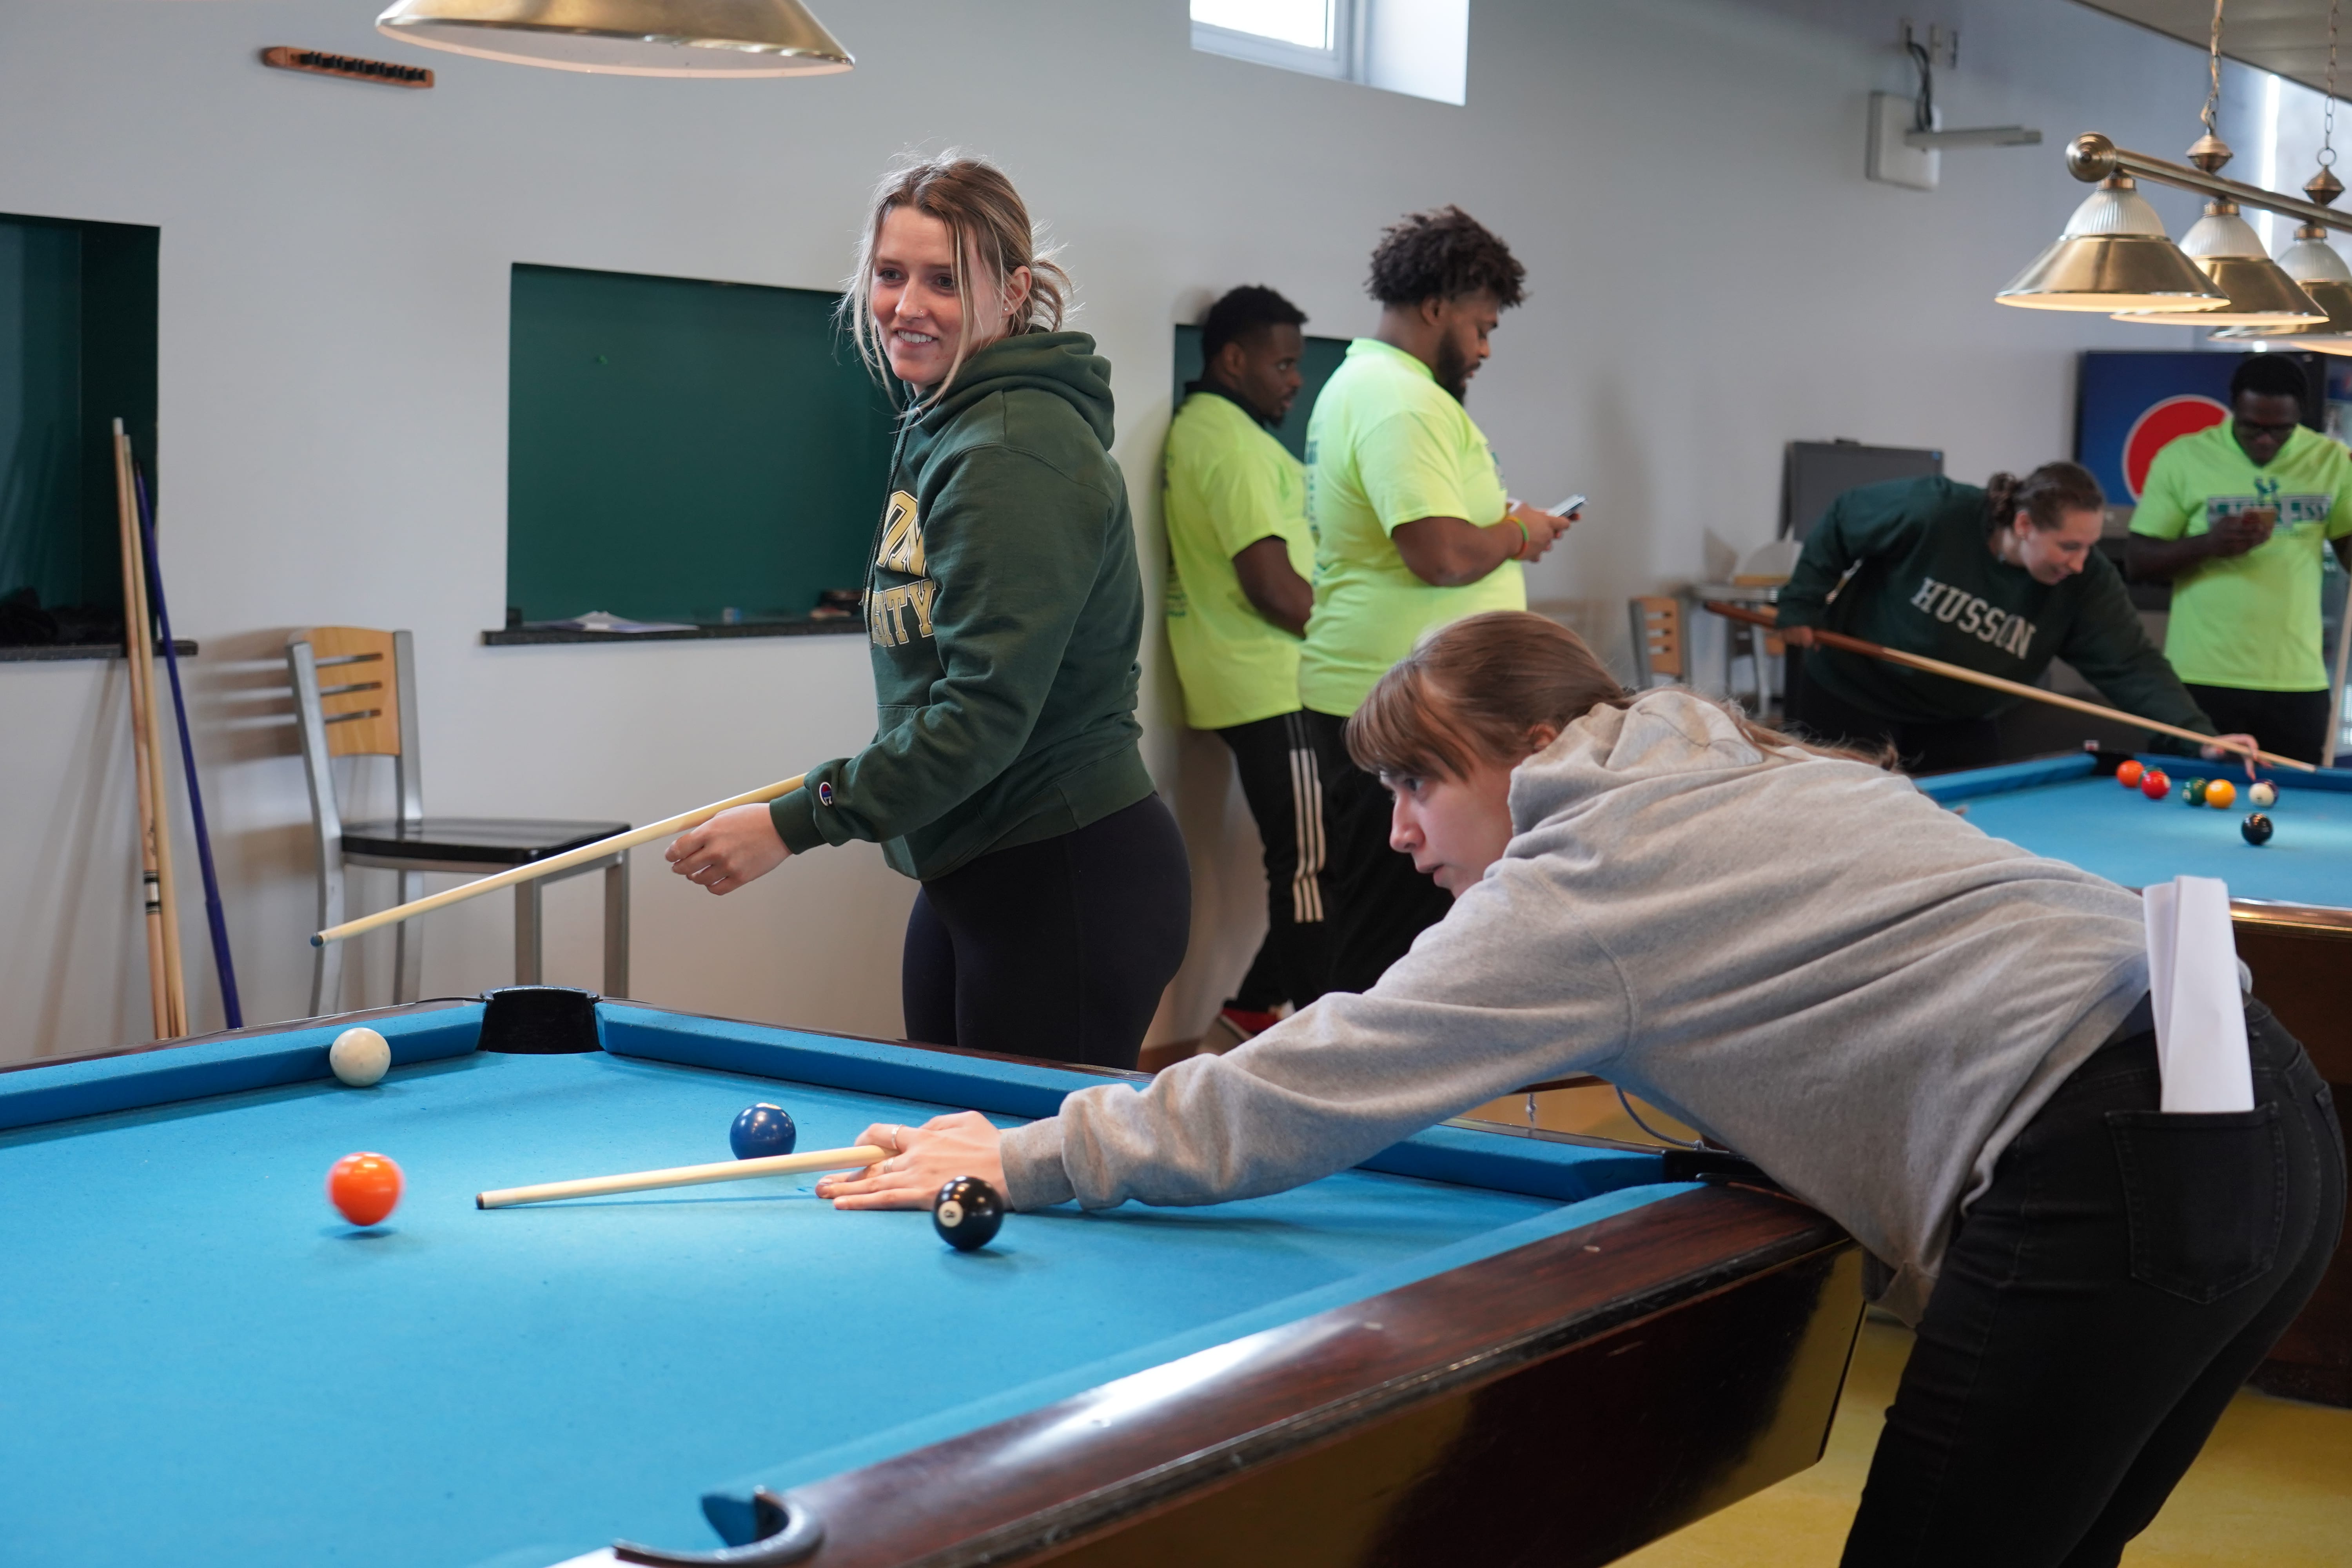 Two students playing pool